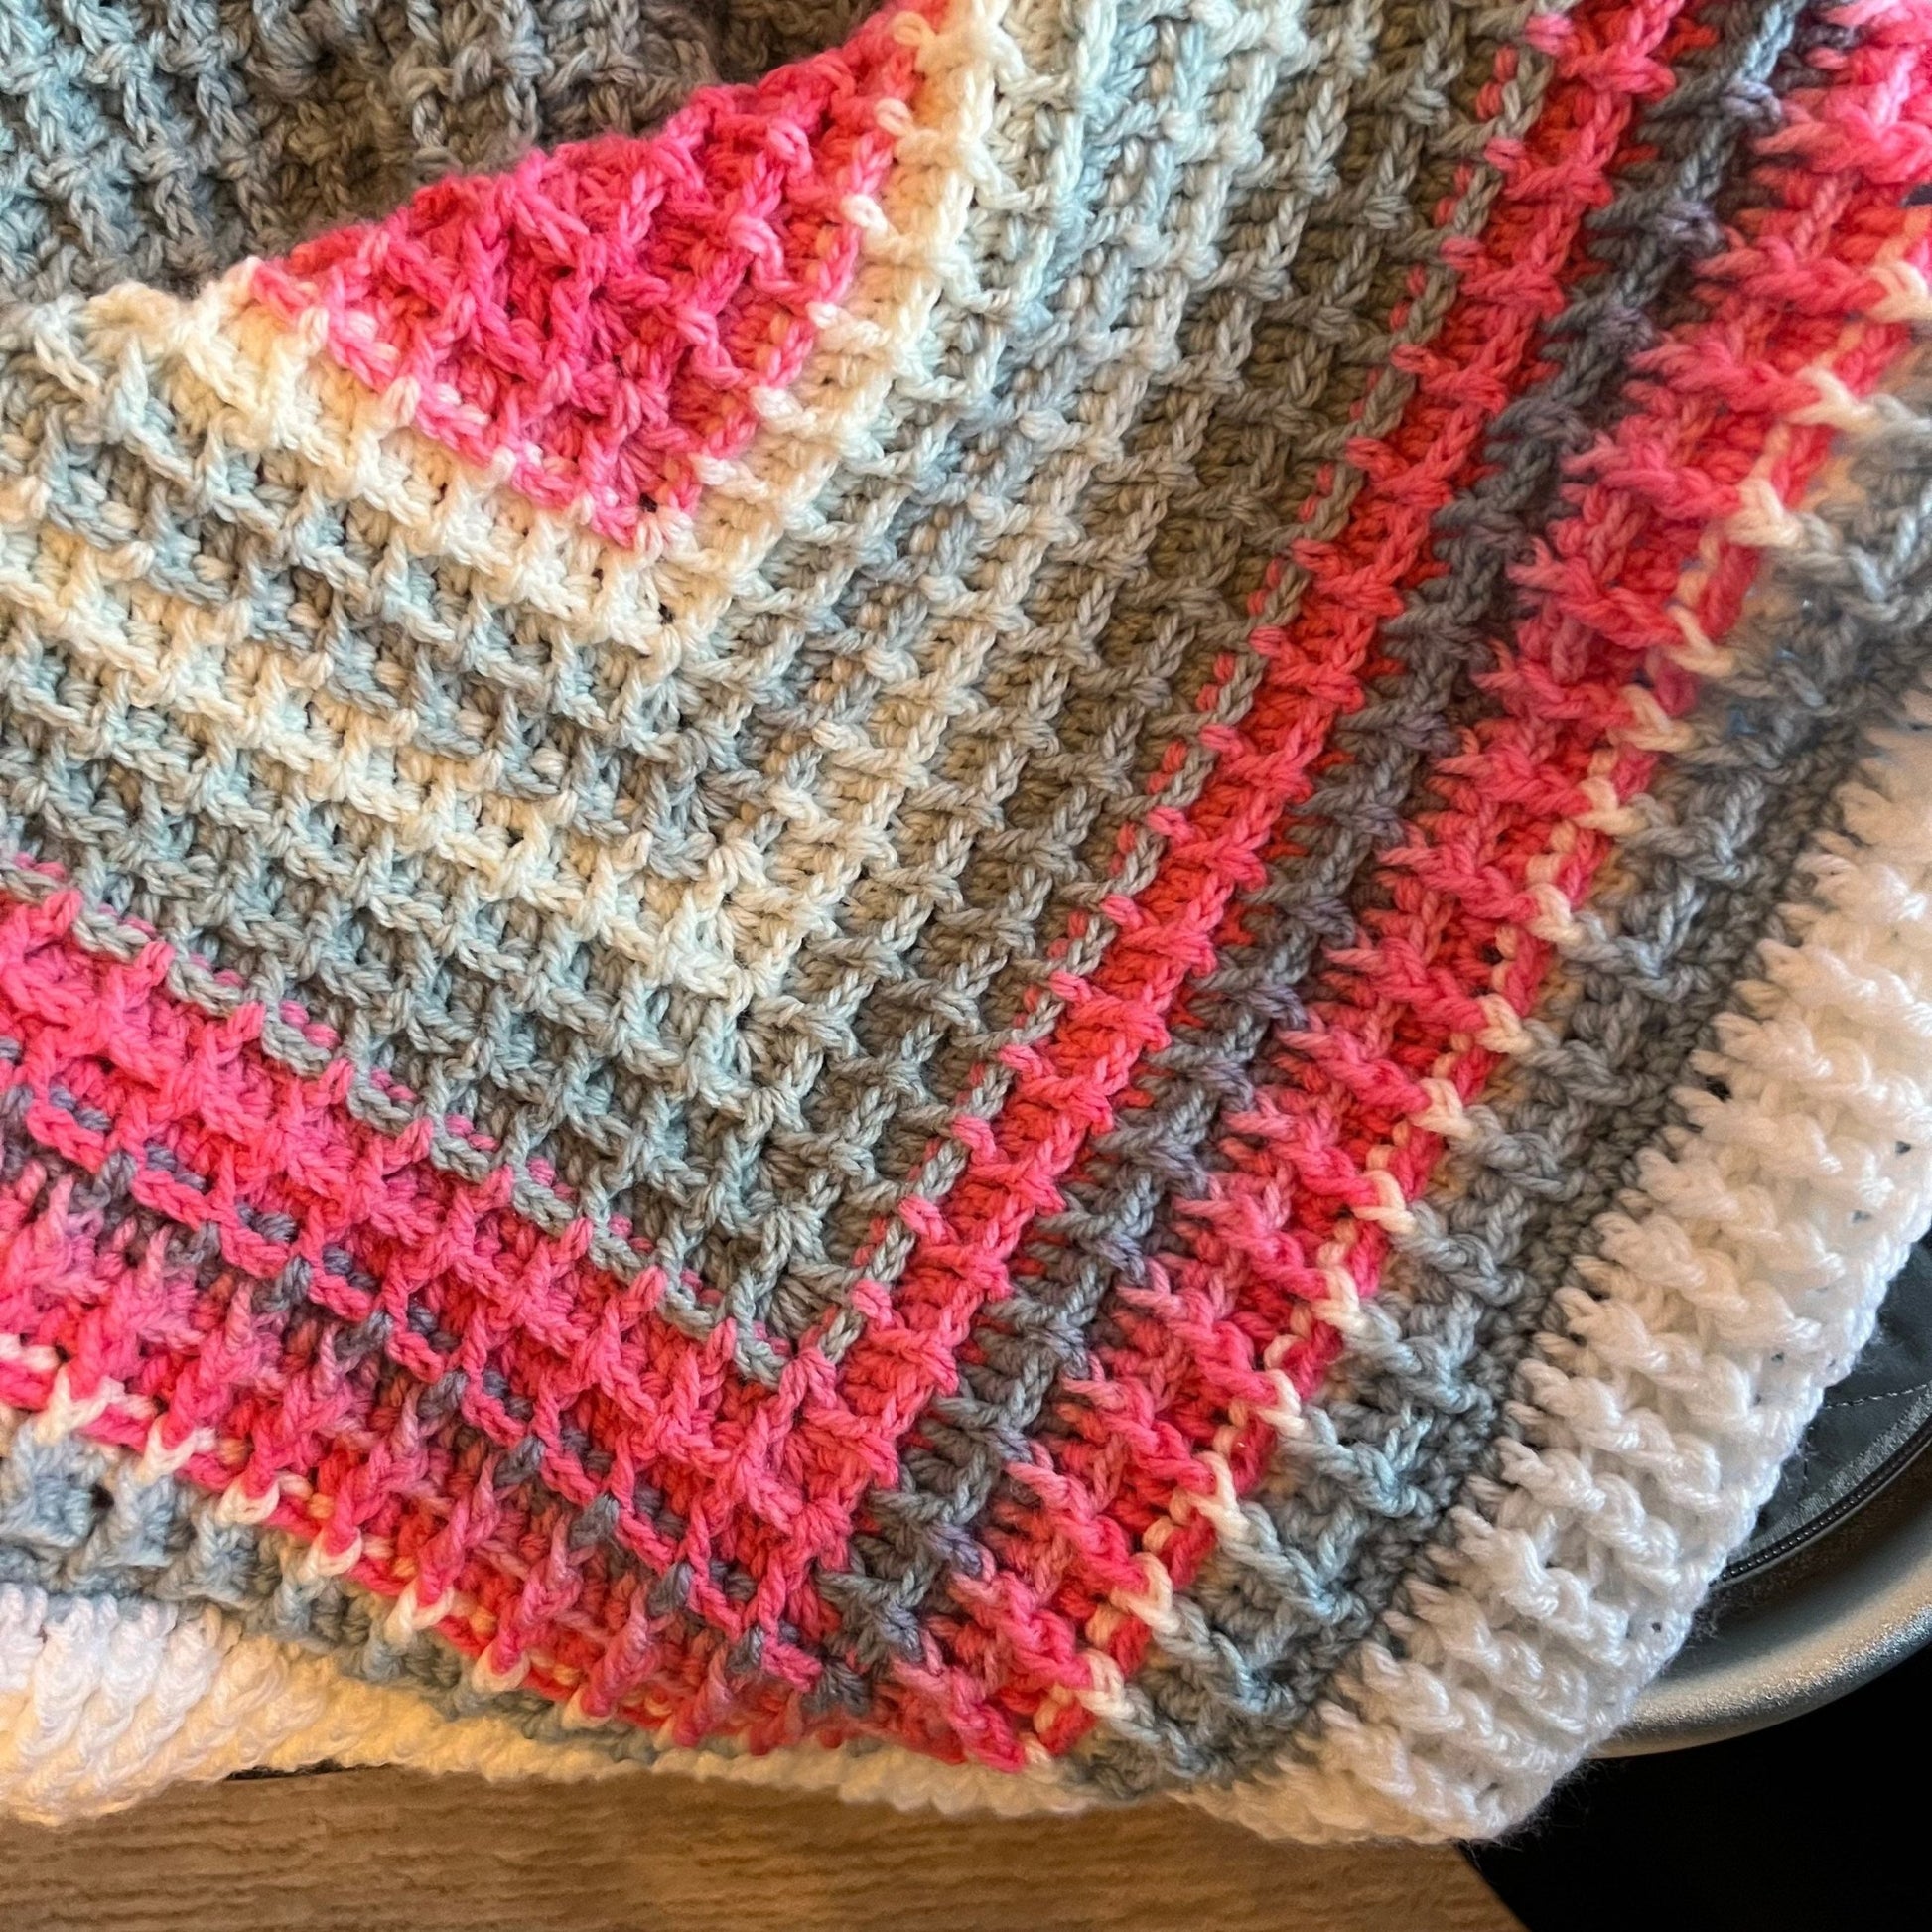 Baby blanket- 36”x36” handmade crochet waffle stitch - pink, white, and gray colors, baby shower gift, handmade heirloom baby blanket - Lilly Grace Sparkle Boutique